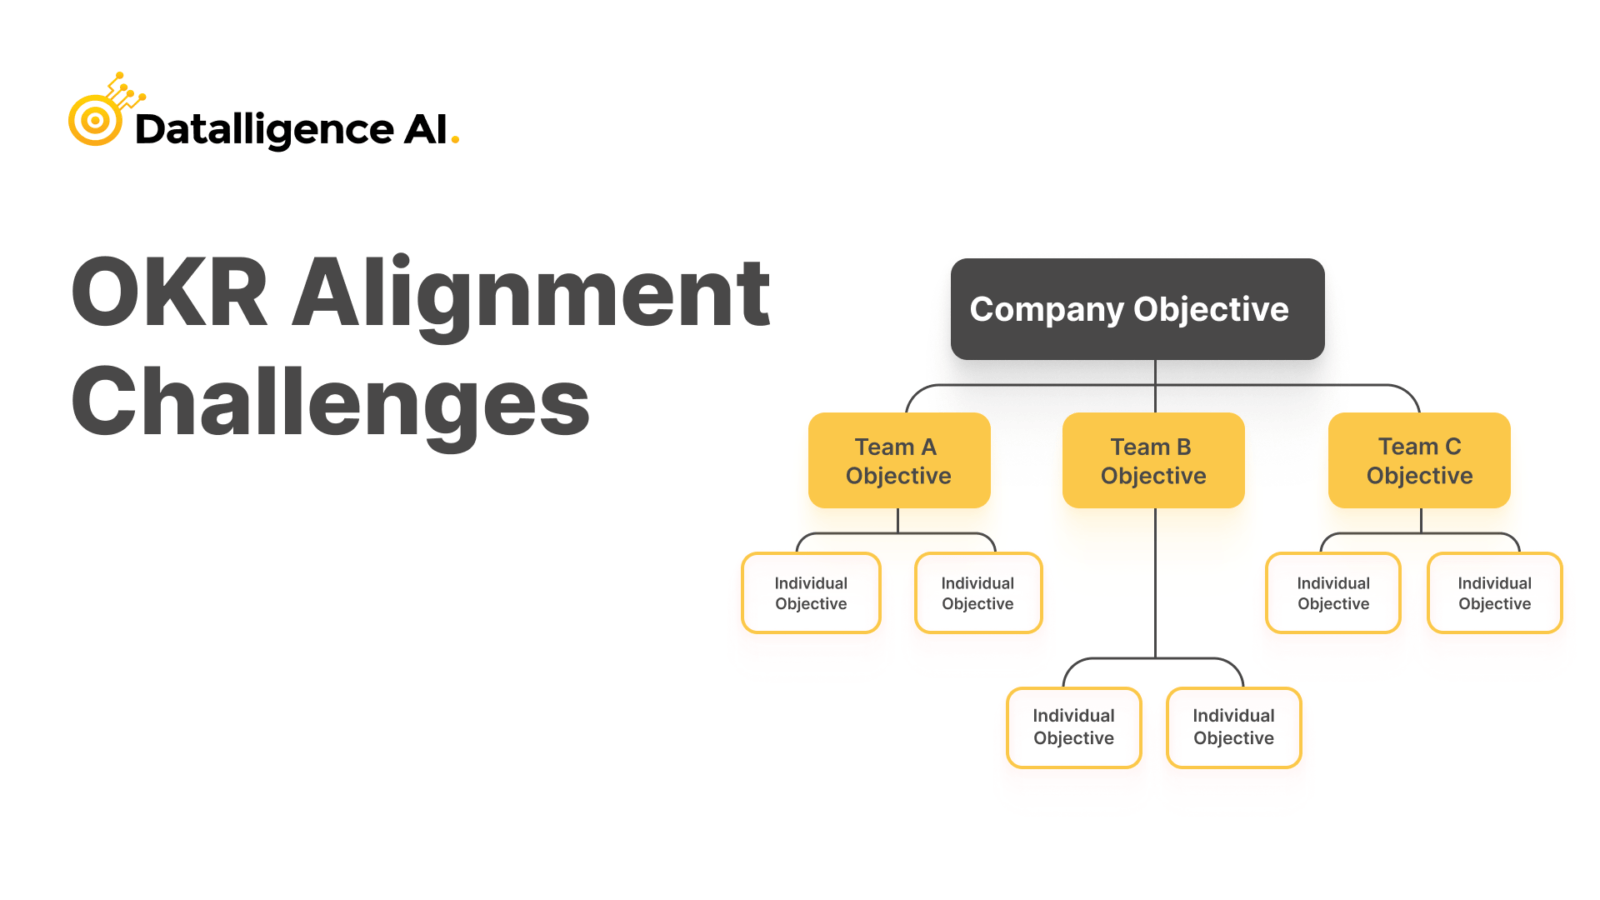 OKR Alignment challenges